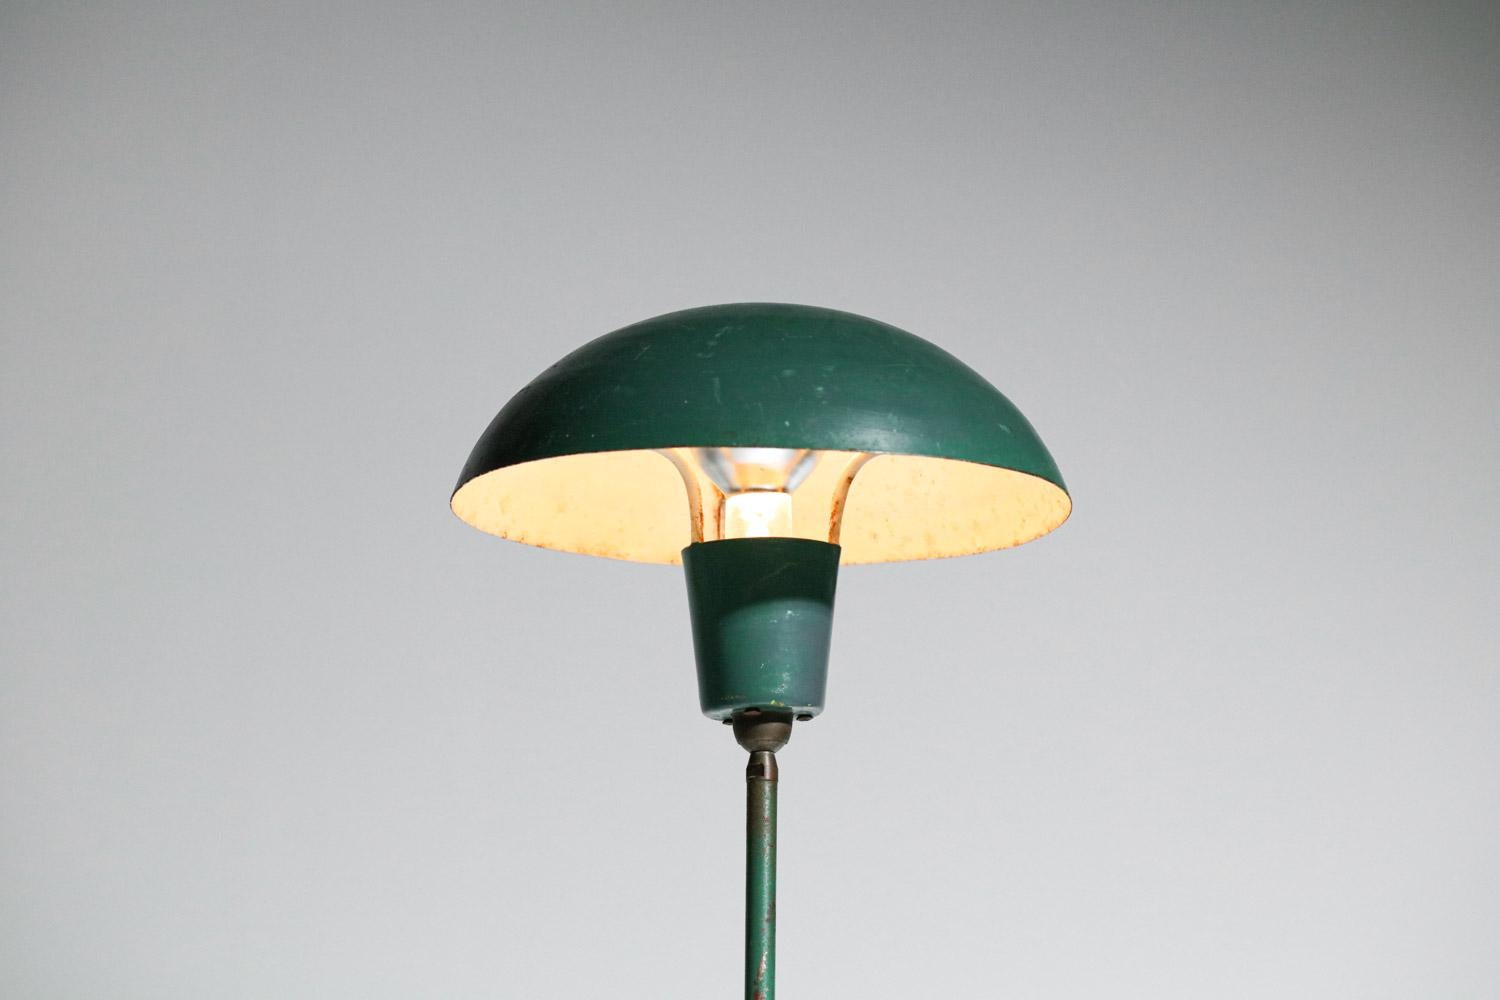 50s style lamps